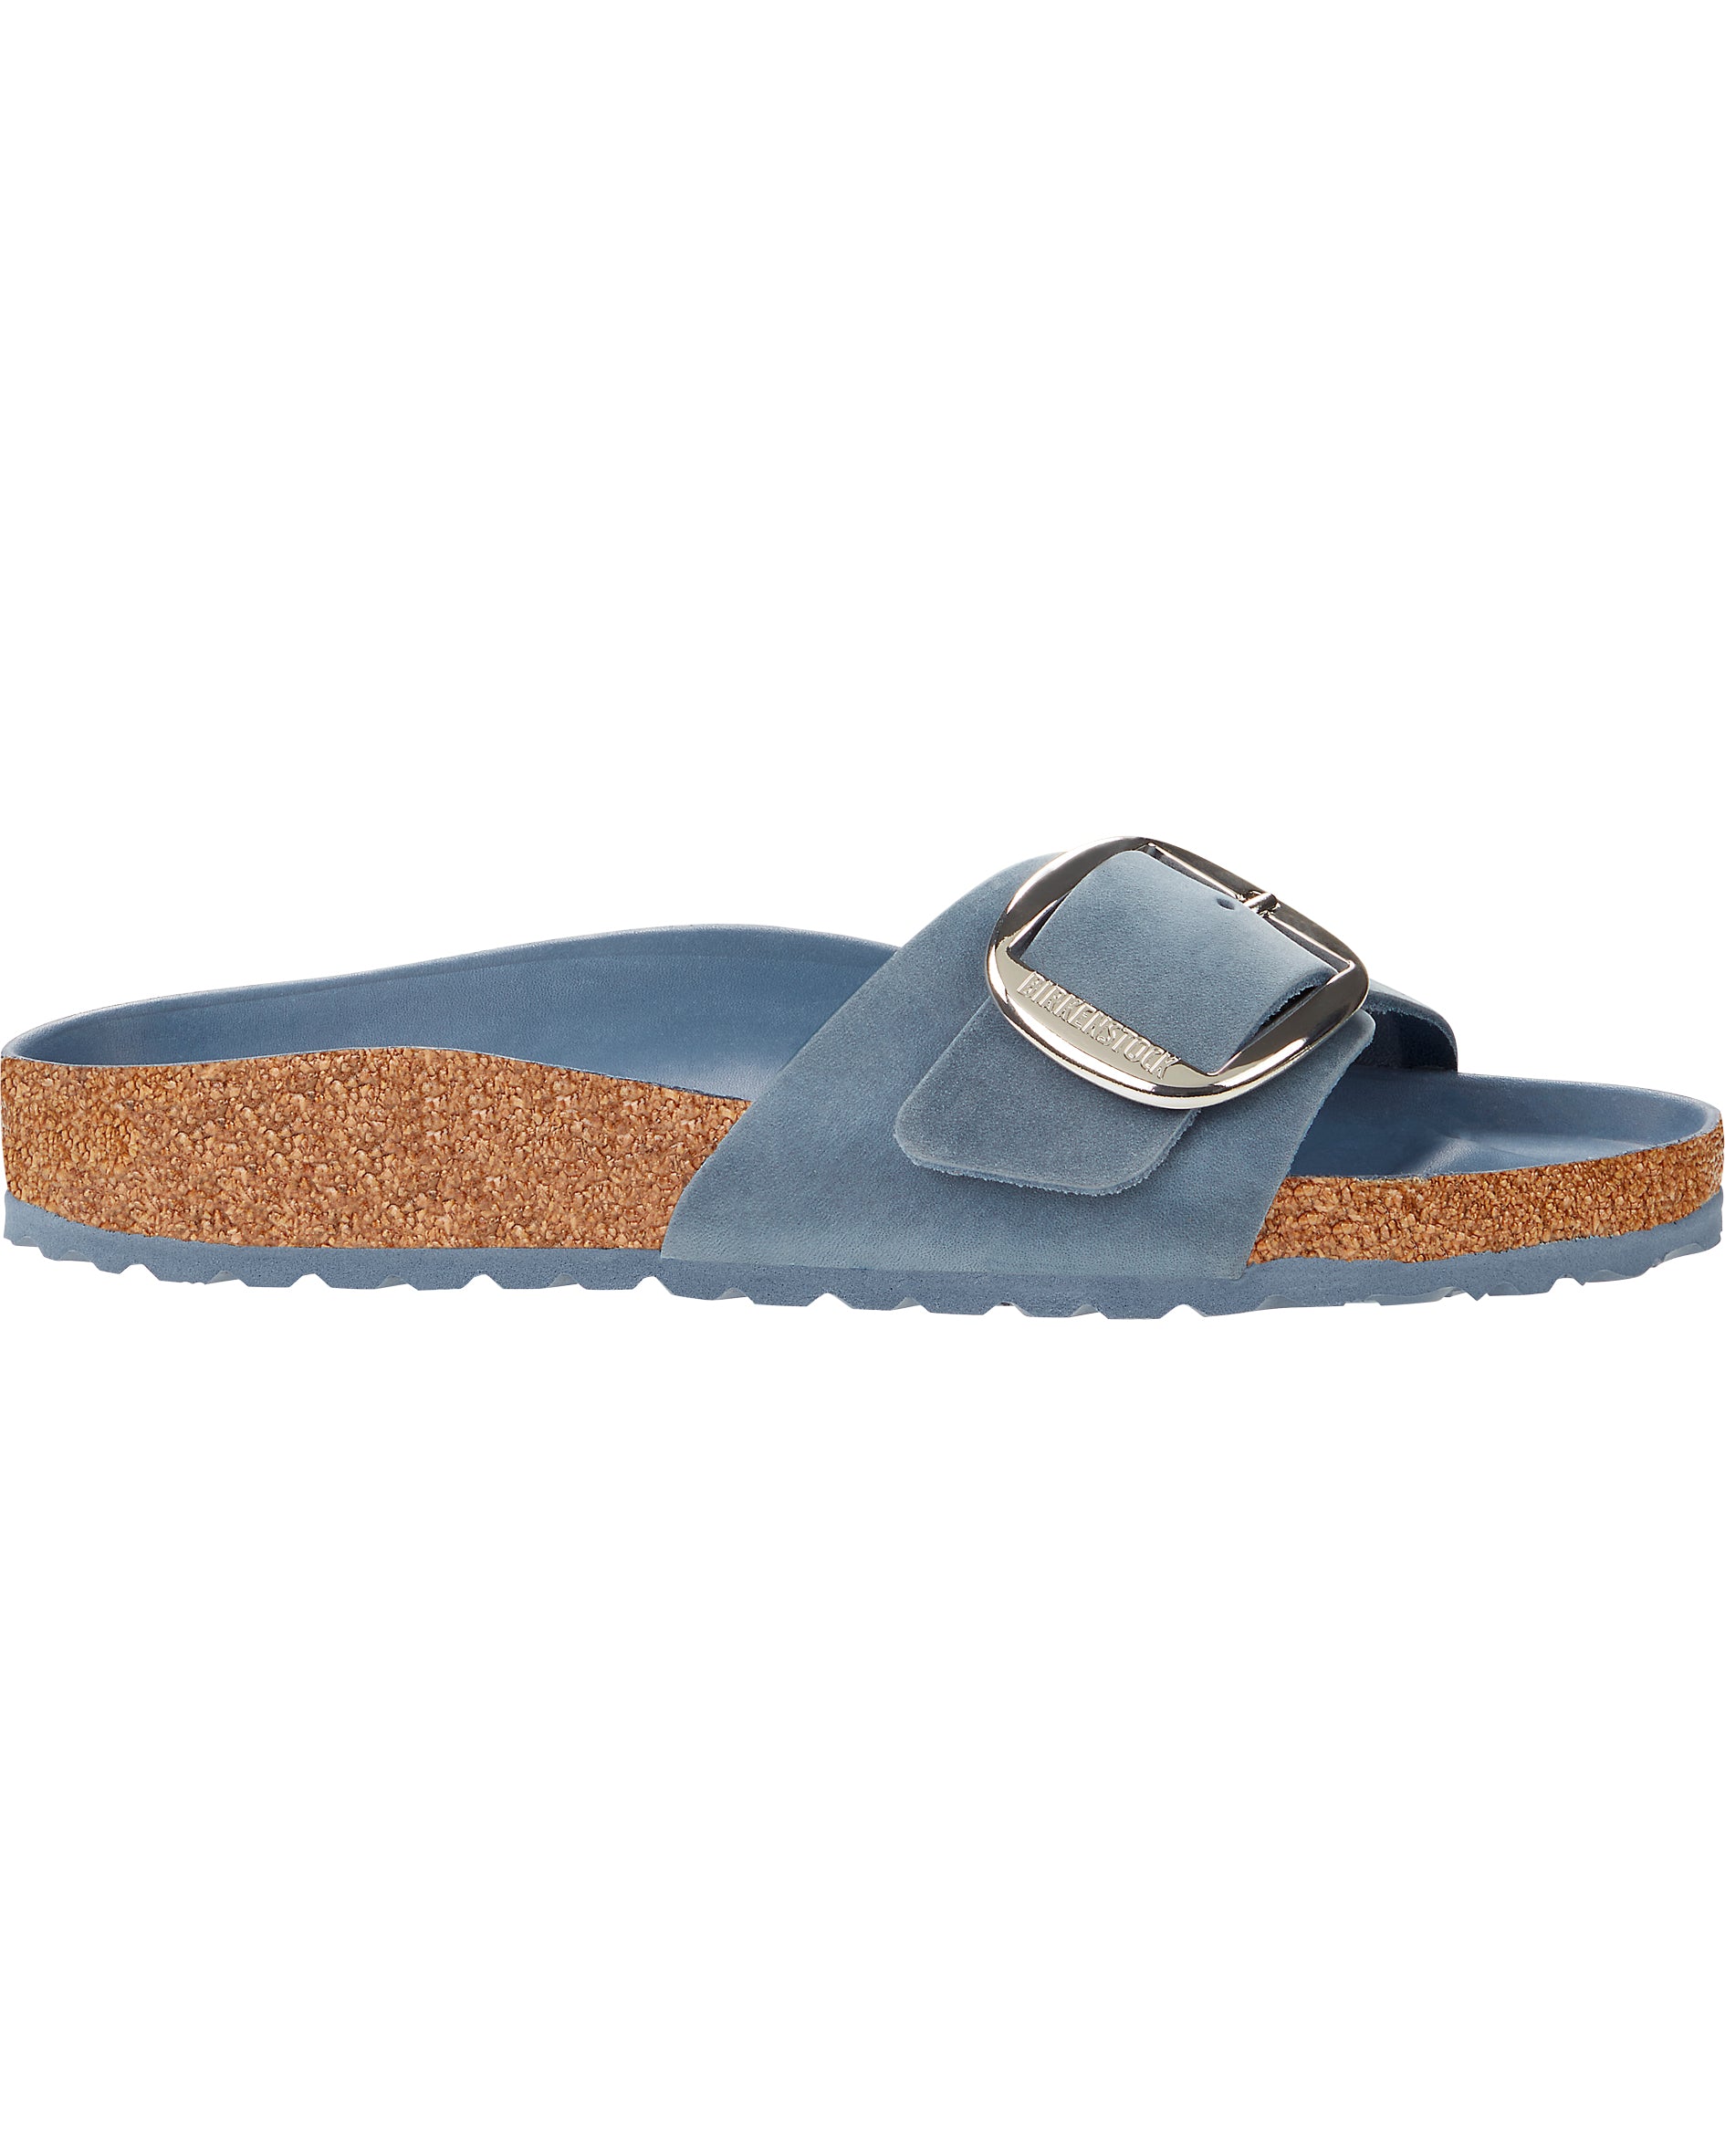 Madrid Big Buckle Dusty Blue Oiled Leather Sandals